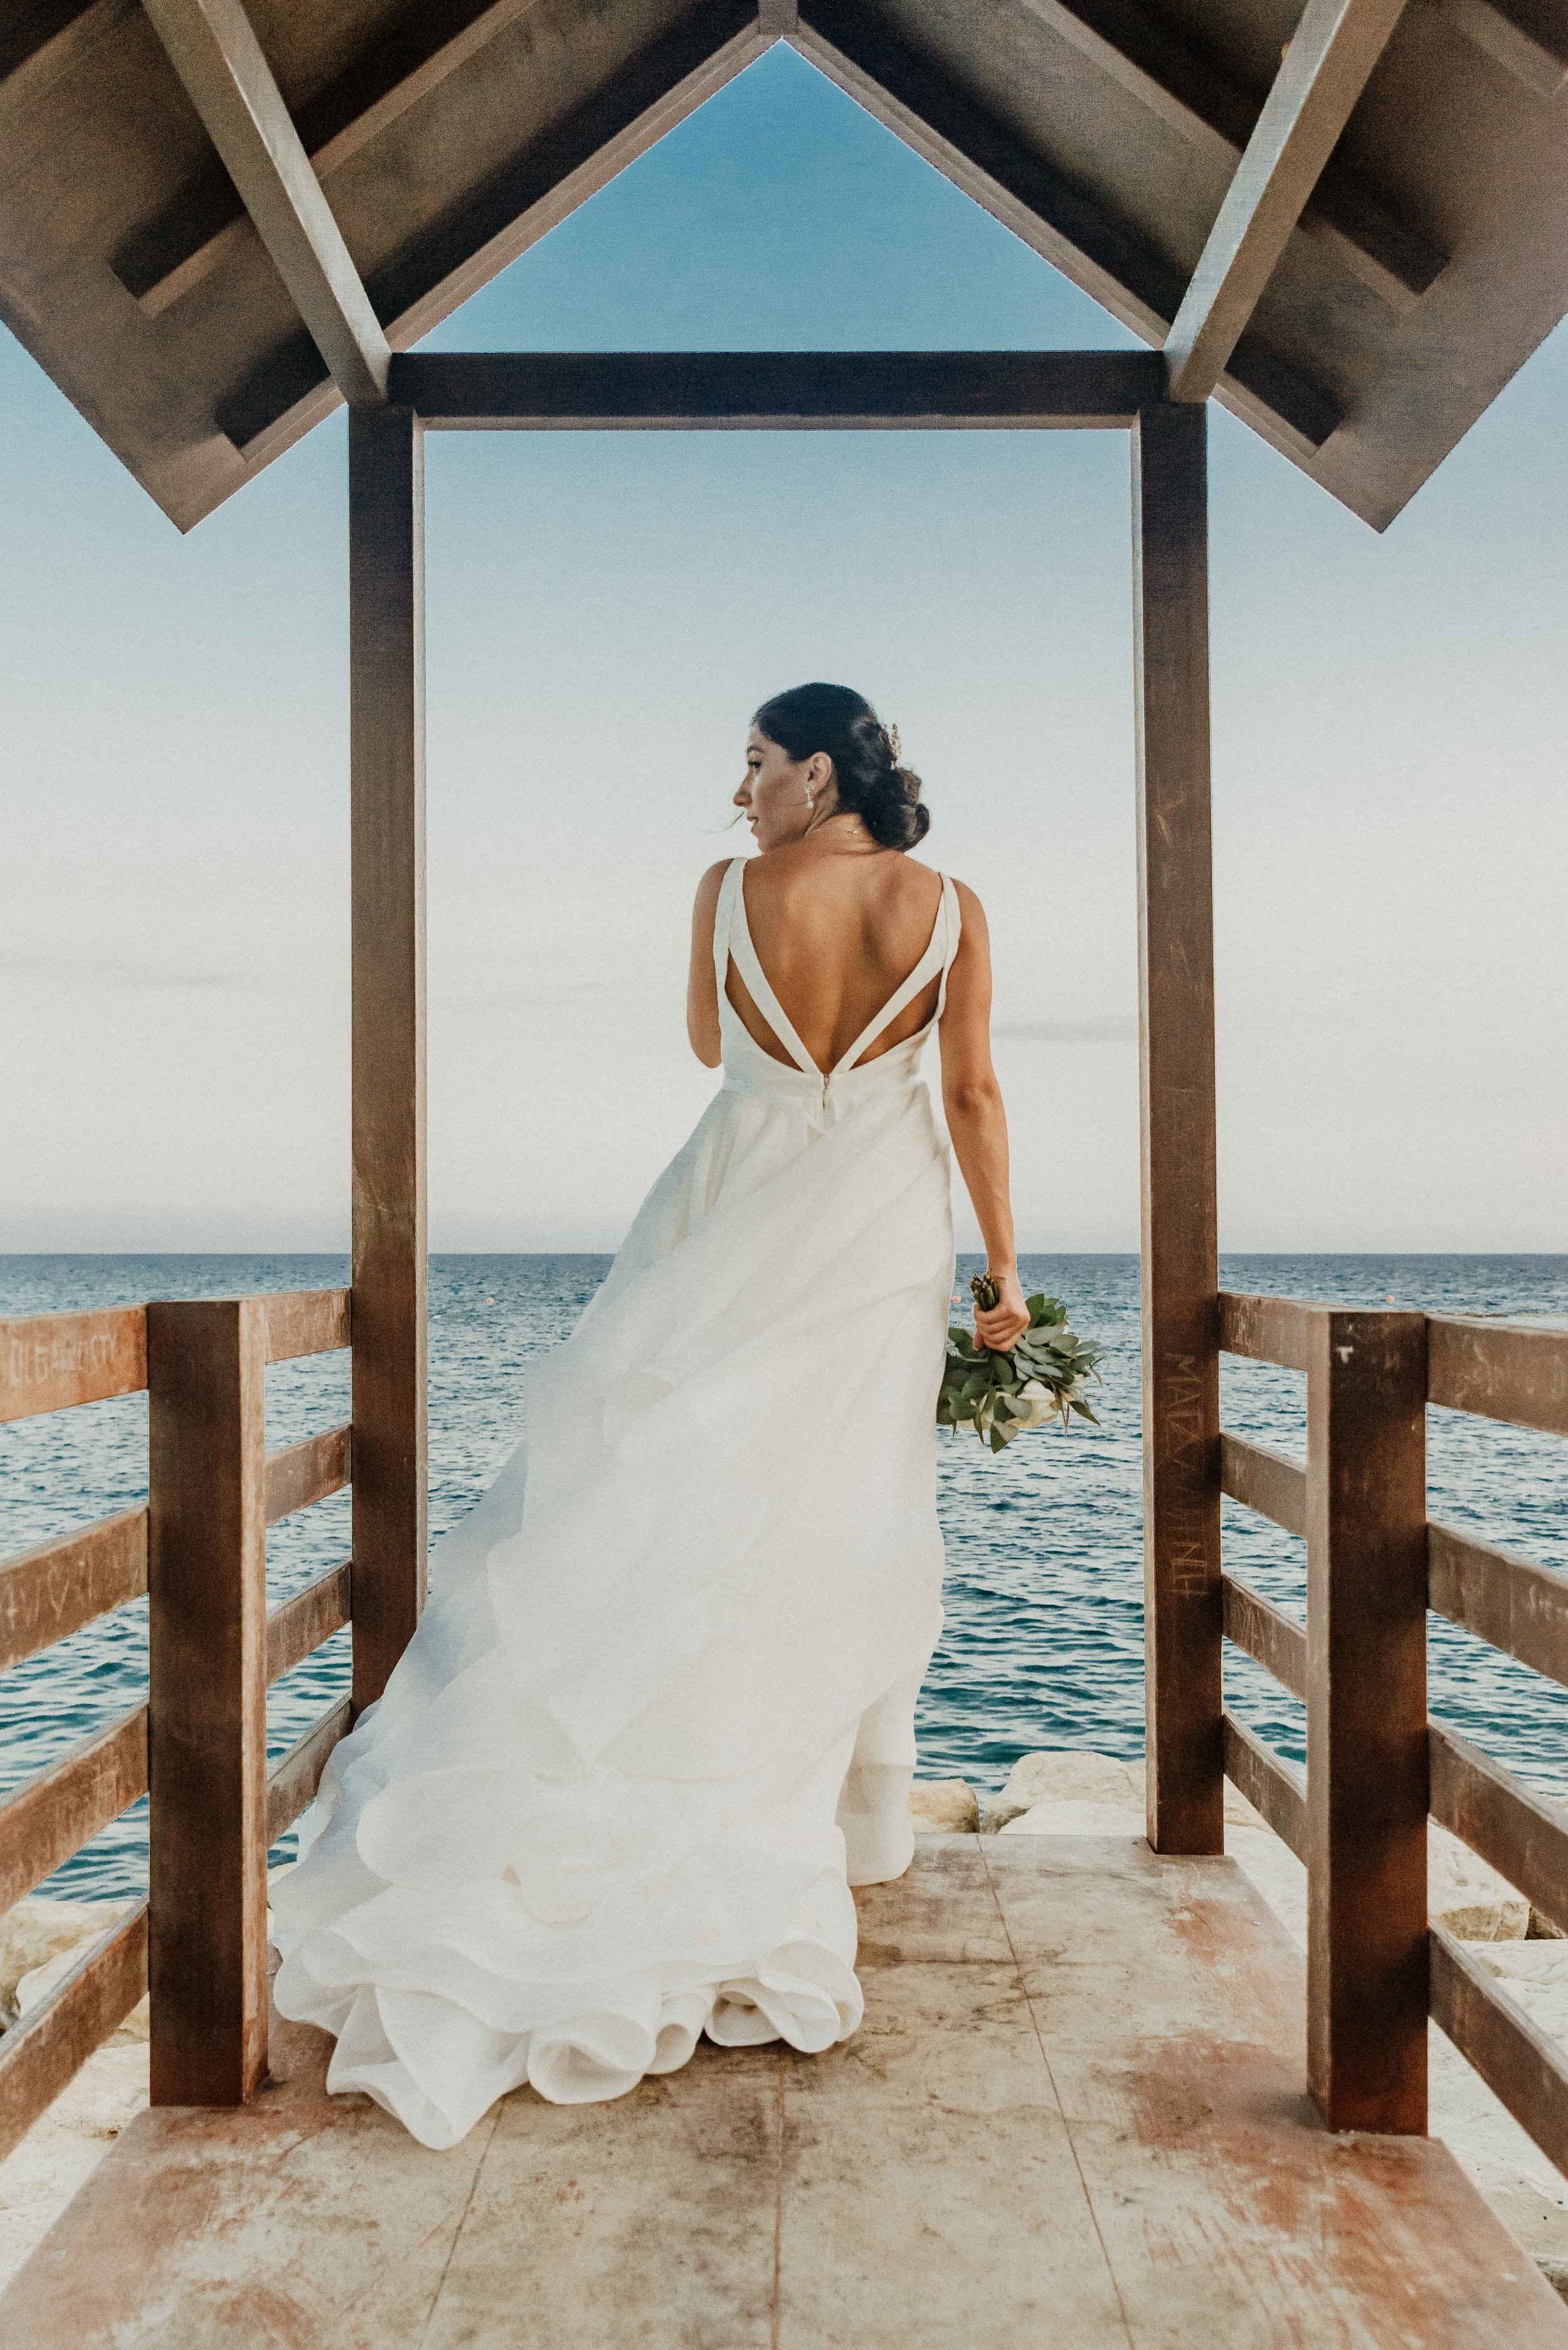  Experience the magic of your wedding day all over again with stunning photos taken in Cyprus